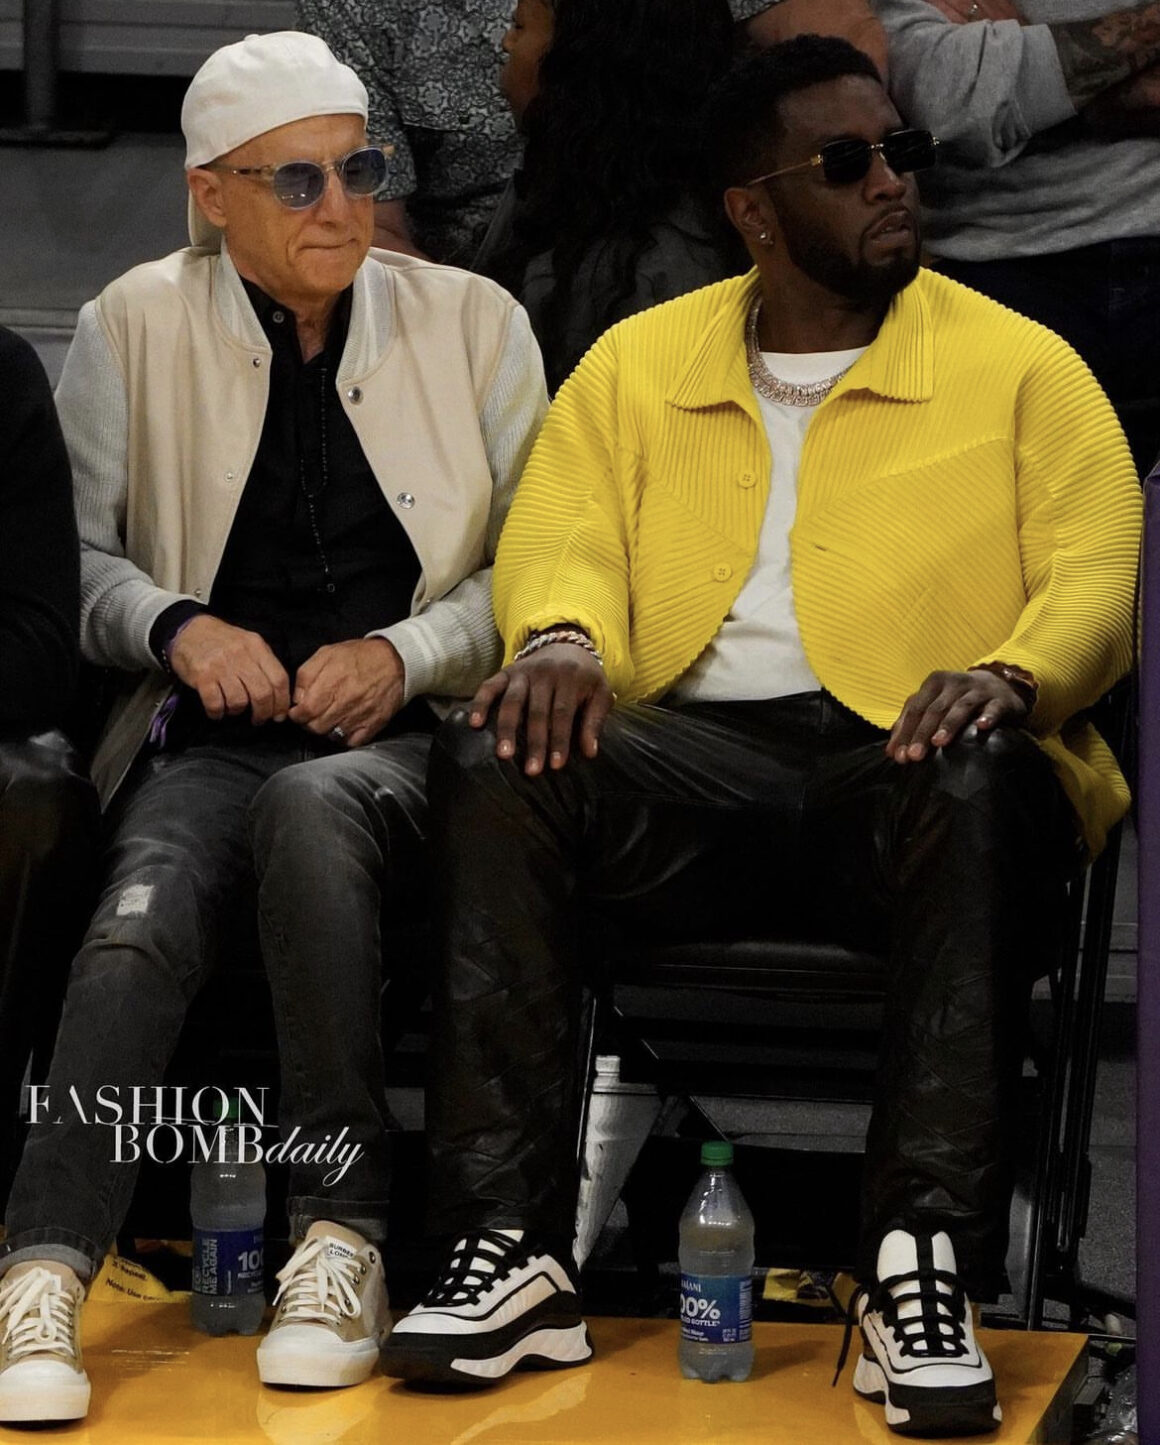 Shannon Sharpe's Lakers vs Grizzlies Game Greg Lauren Blue Patchwork  Cardigan + What was the Heated Argument About? – Fashion Bomb Daily